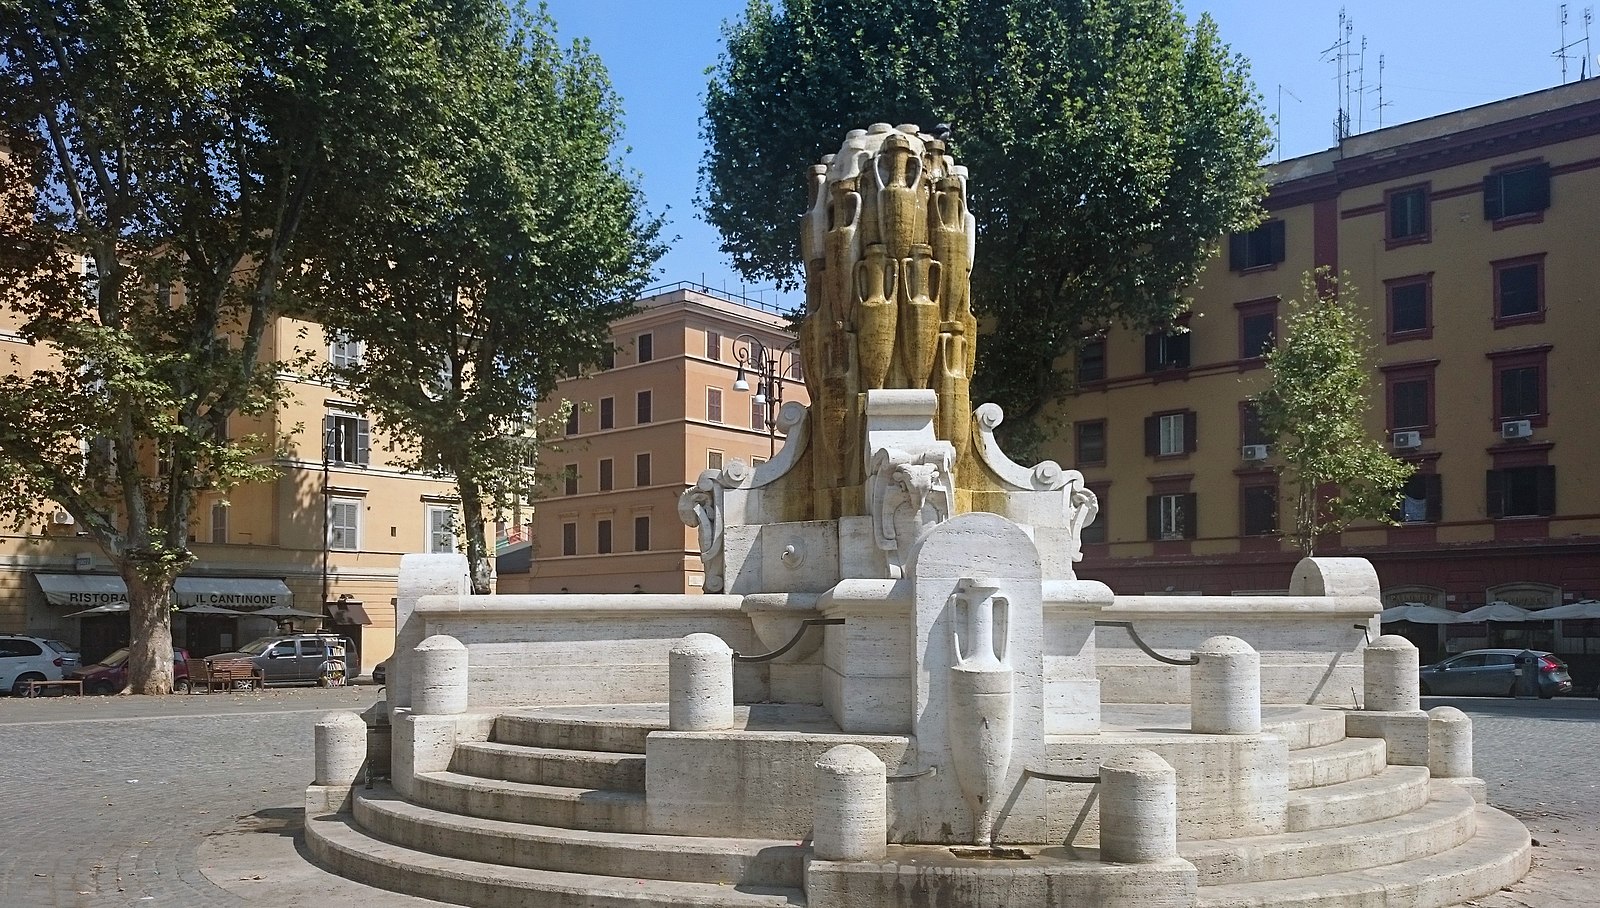 Testaccio district: 5 must see places